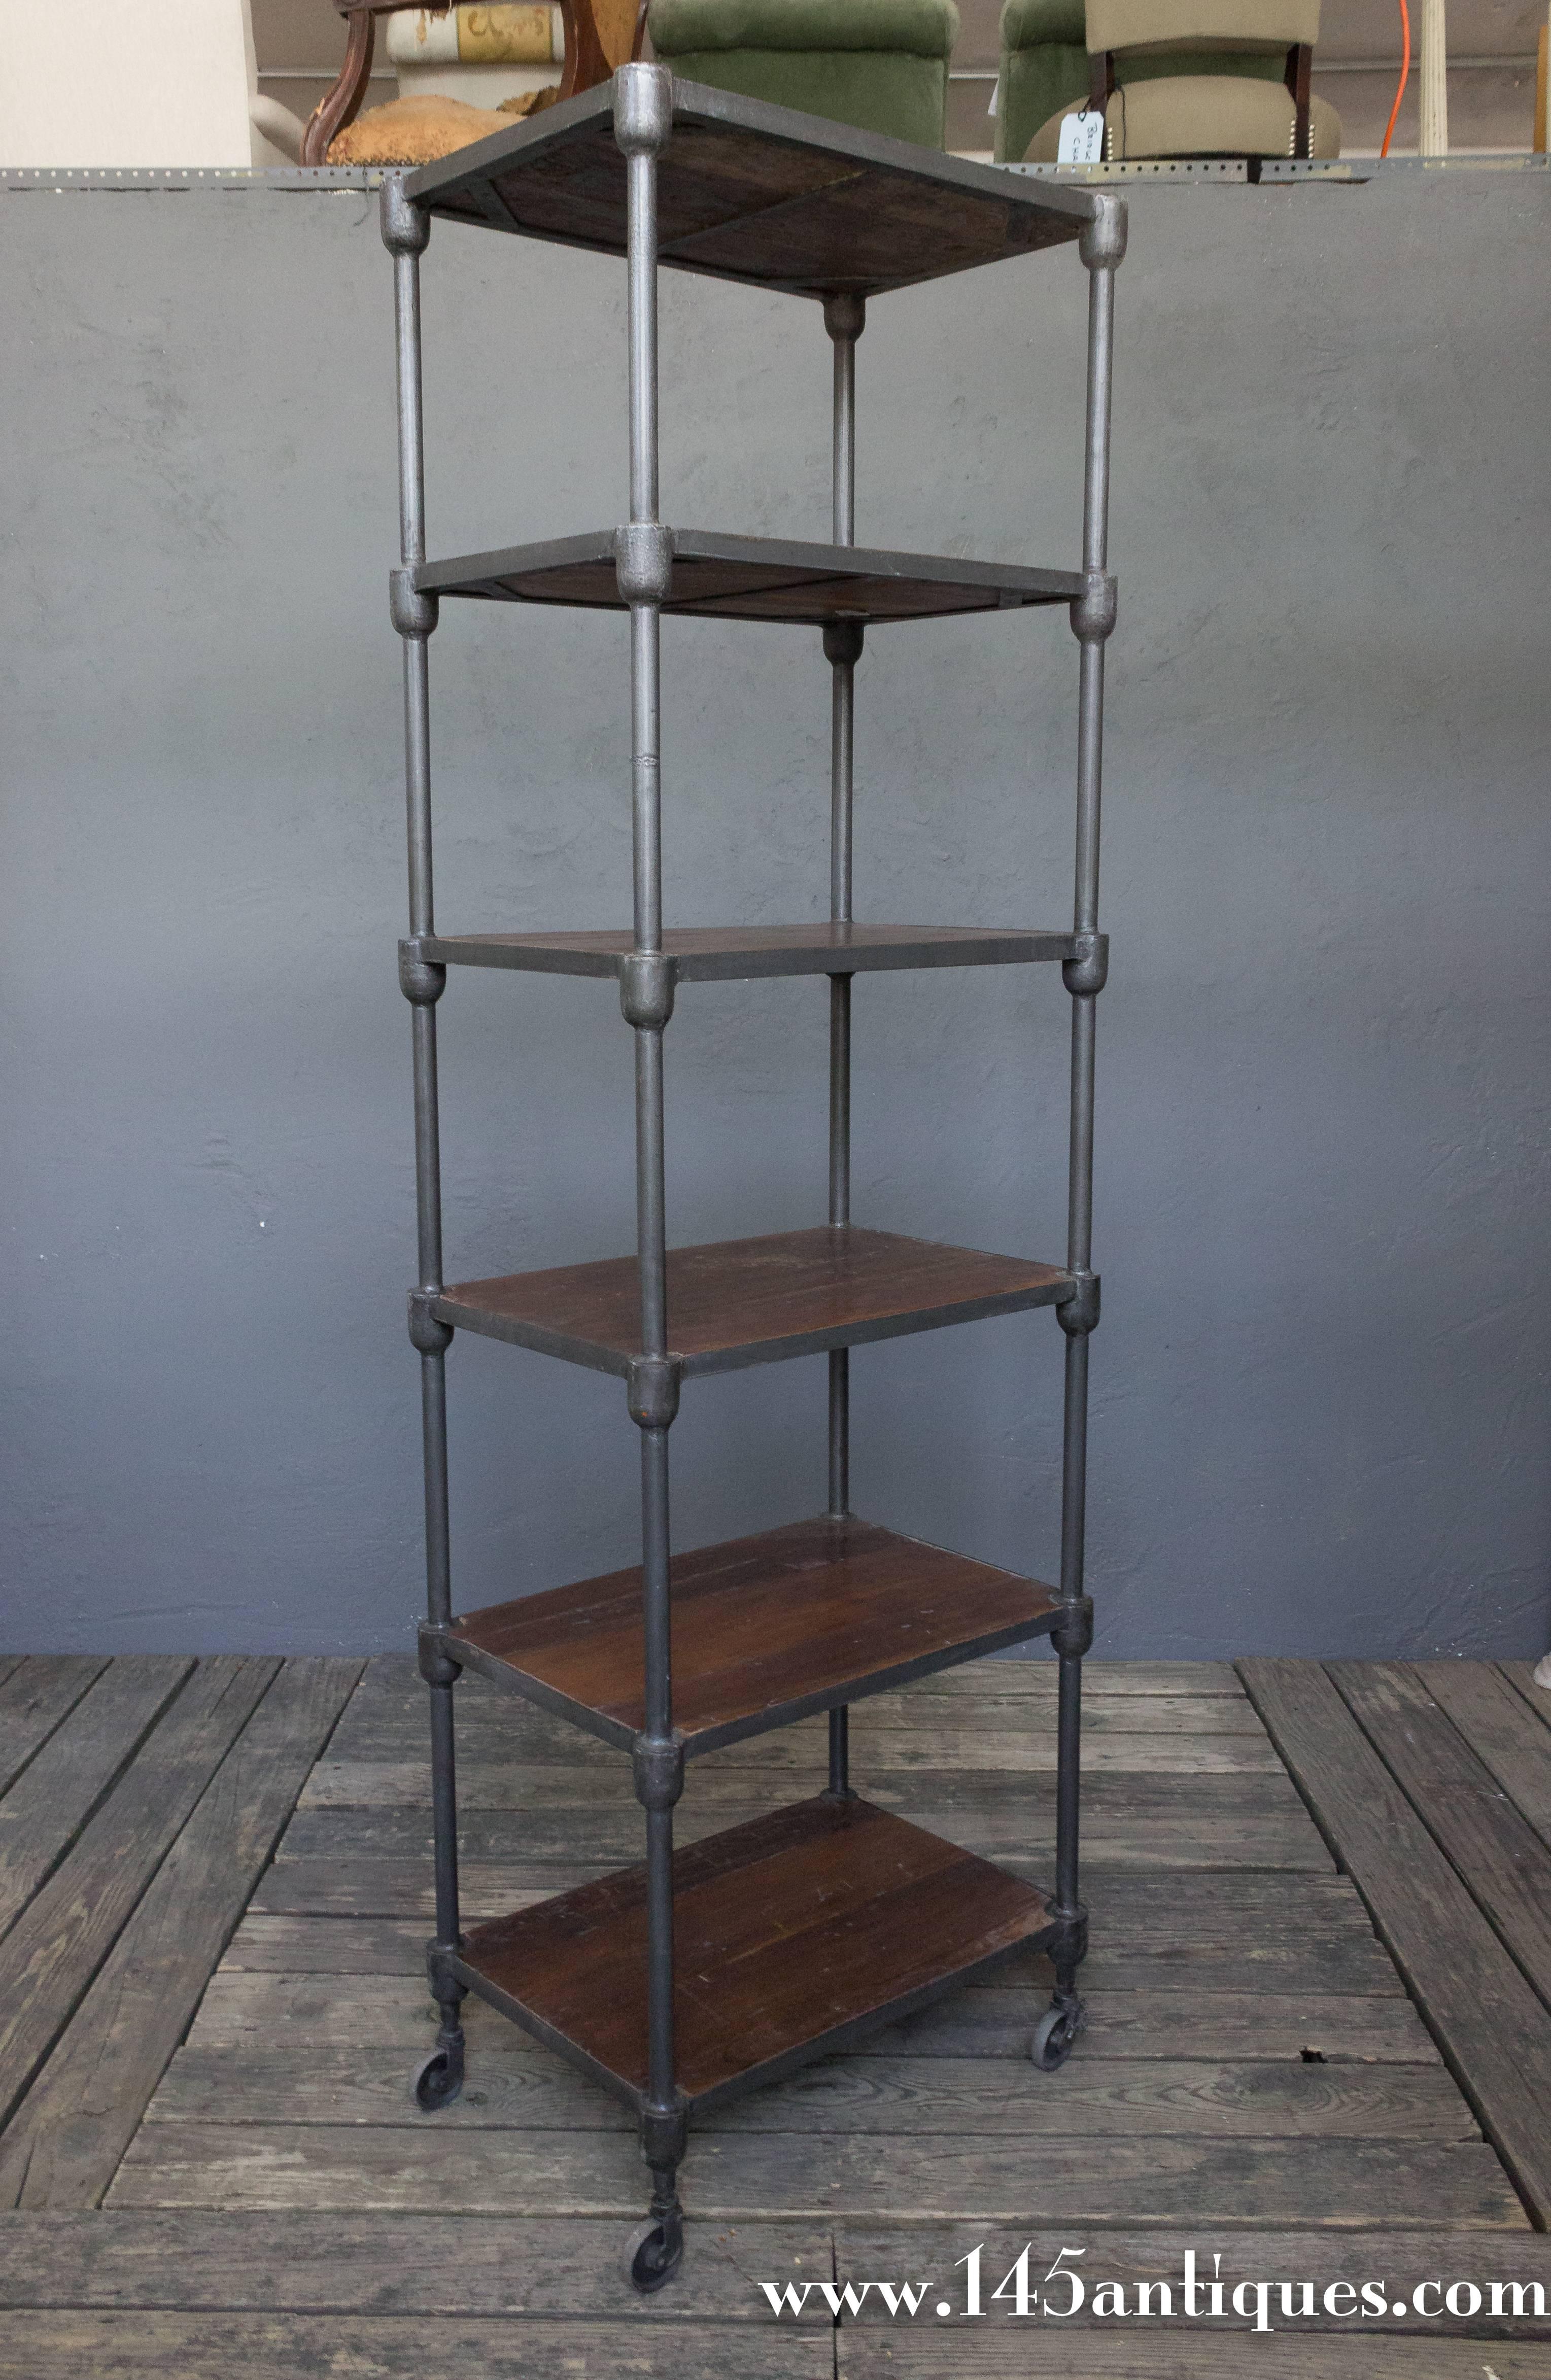 Handsome and practical etagere with a sturdy iron frame and wood shelves in an aged patina. The unit is on wheels and can be easily moved around, French, early 20th century.